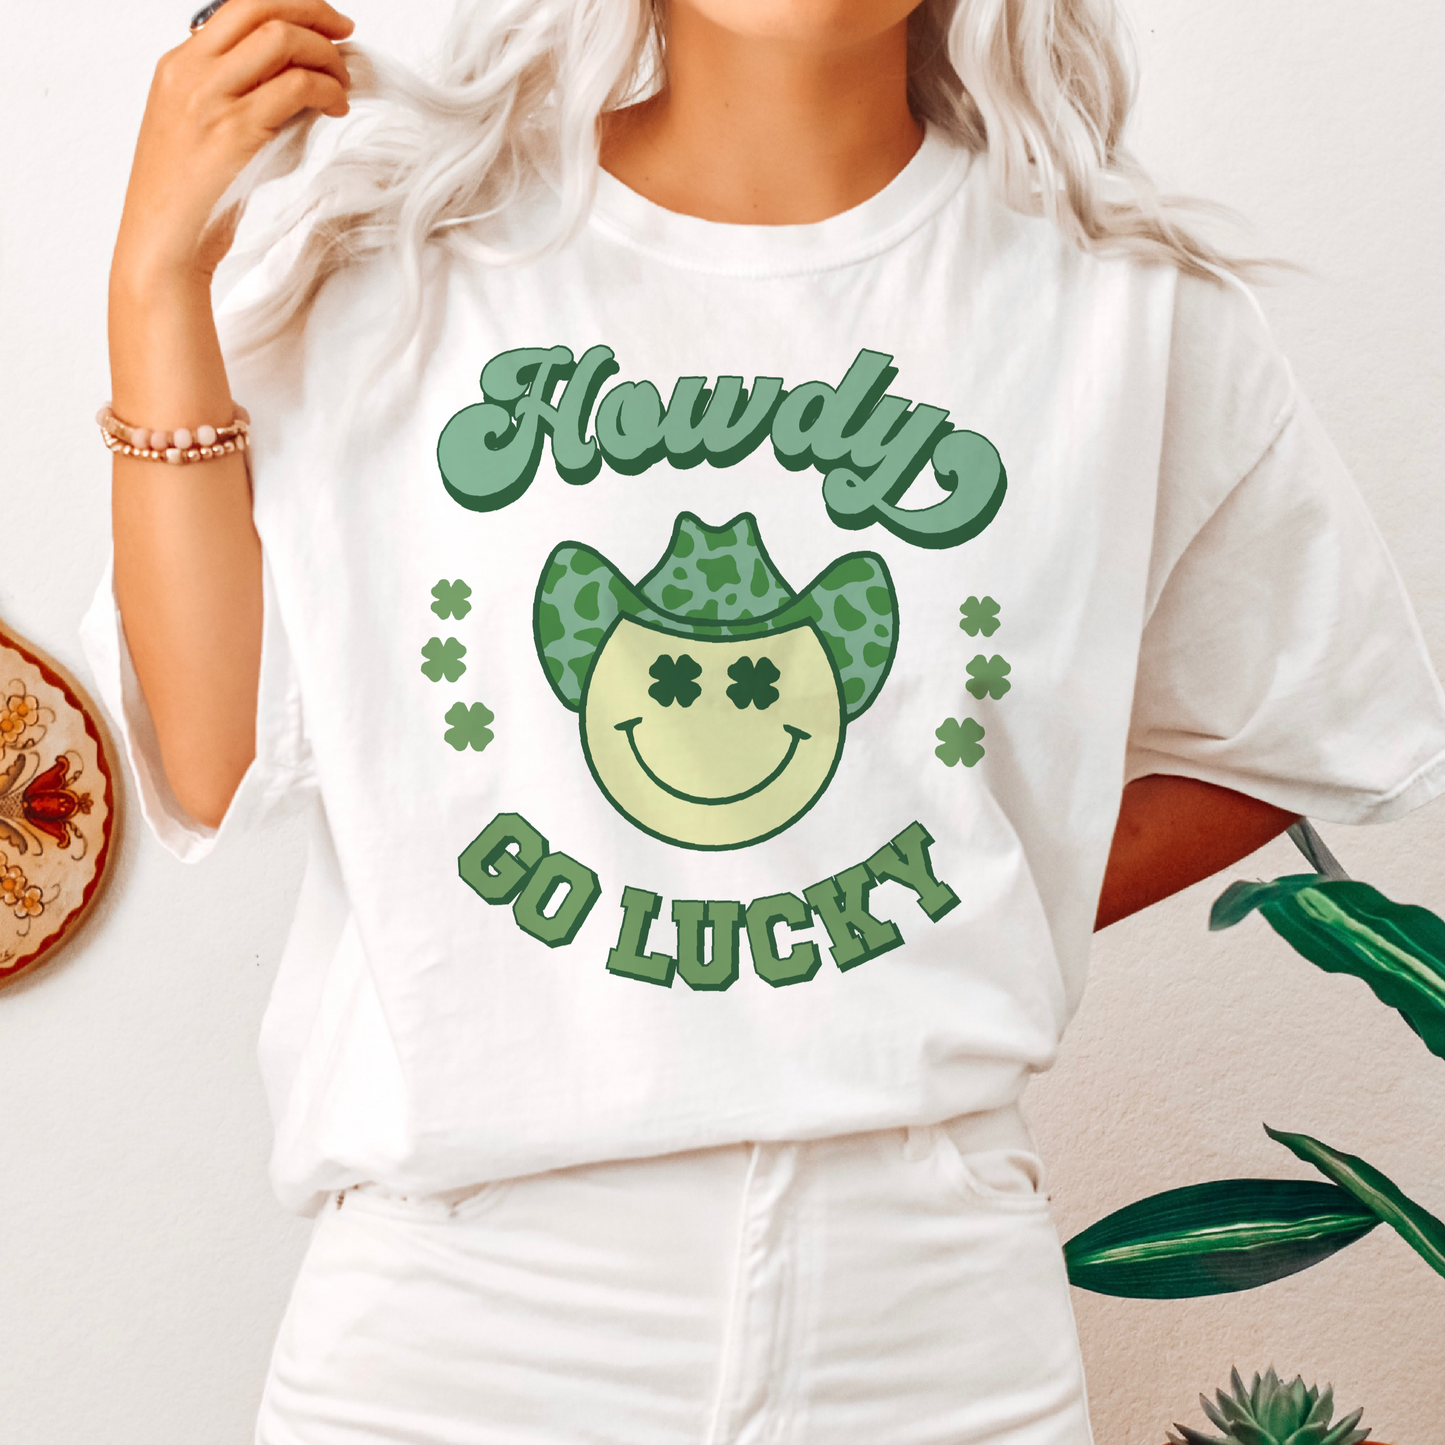 Howdy Go Lucky PNG SVG | St. Patricks Day Sublimation | Groovy Patty's Tshirt Design